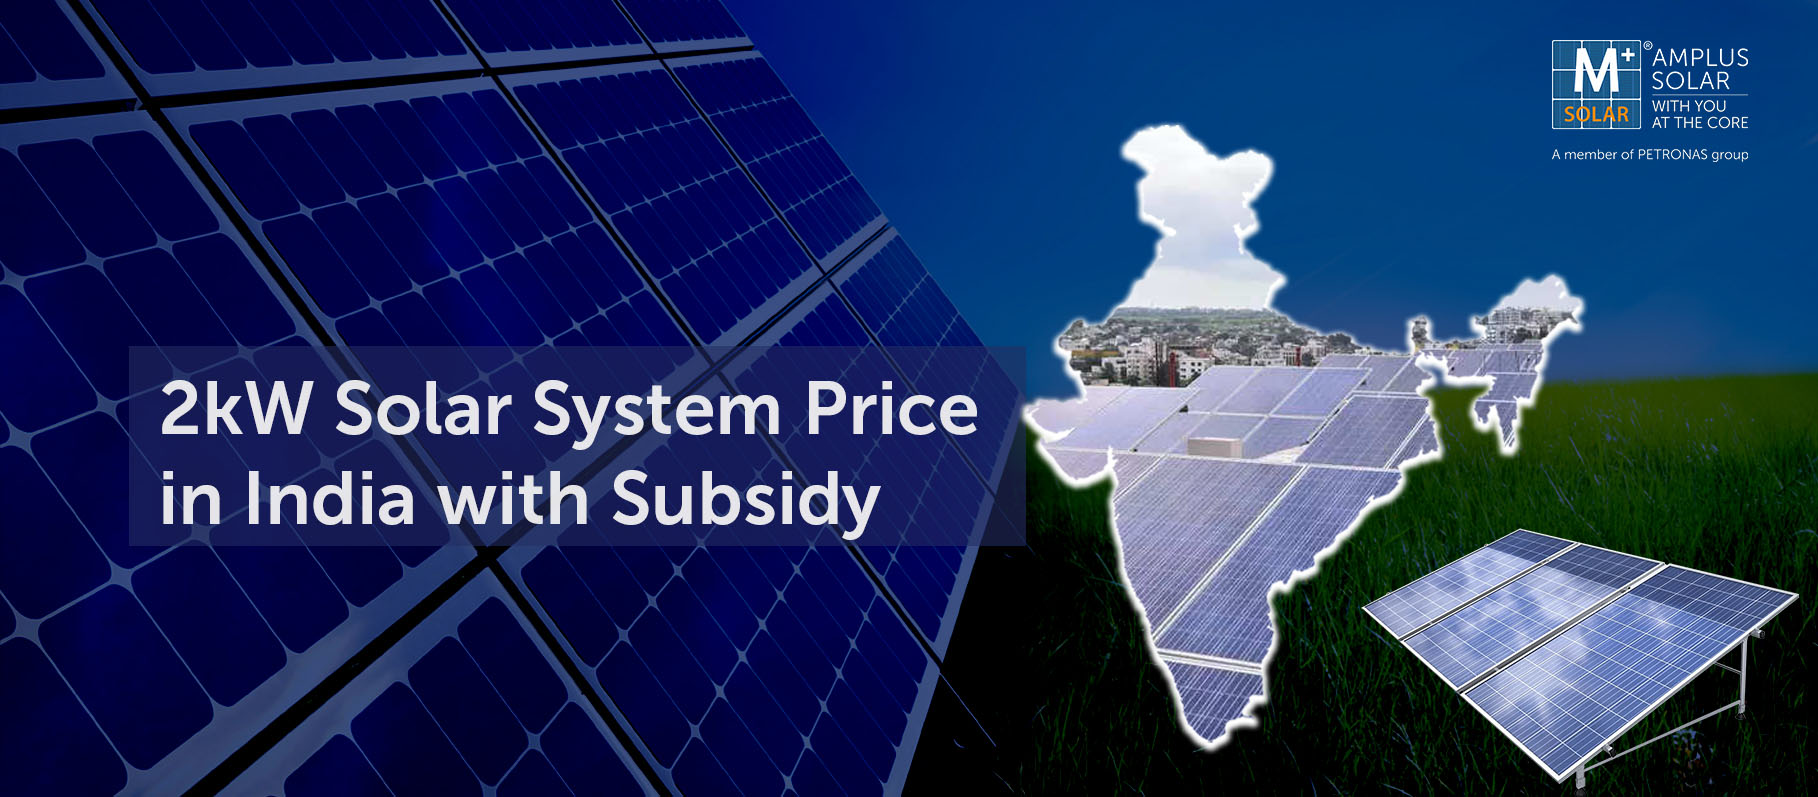 2kW Solar System Price in India with Subsidy